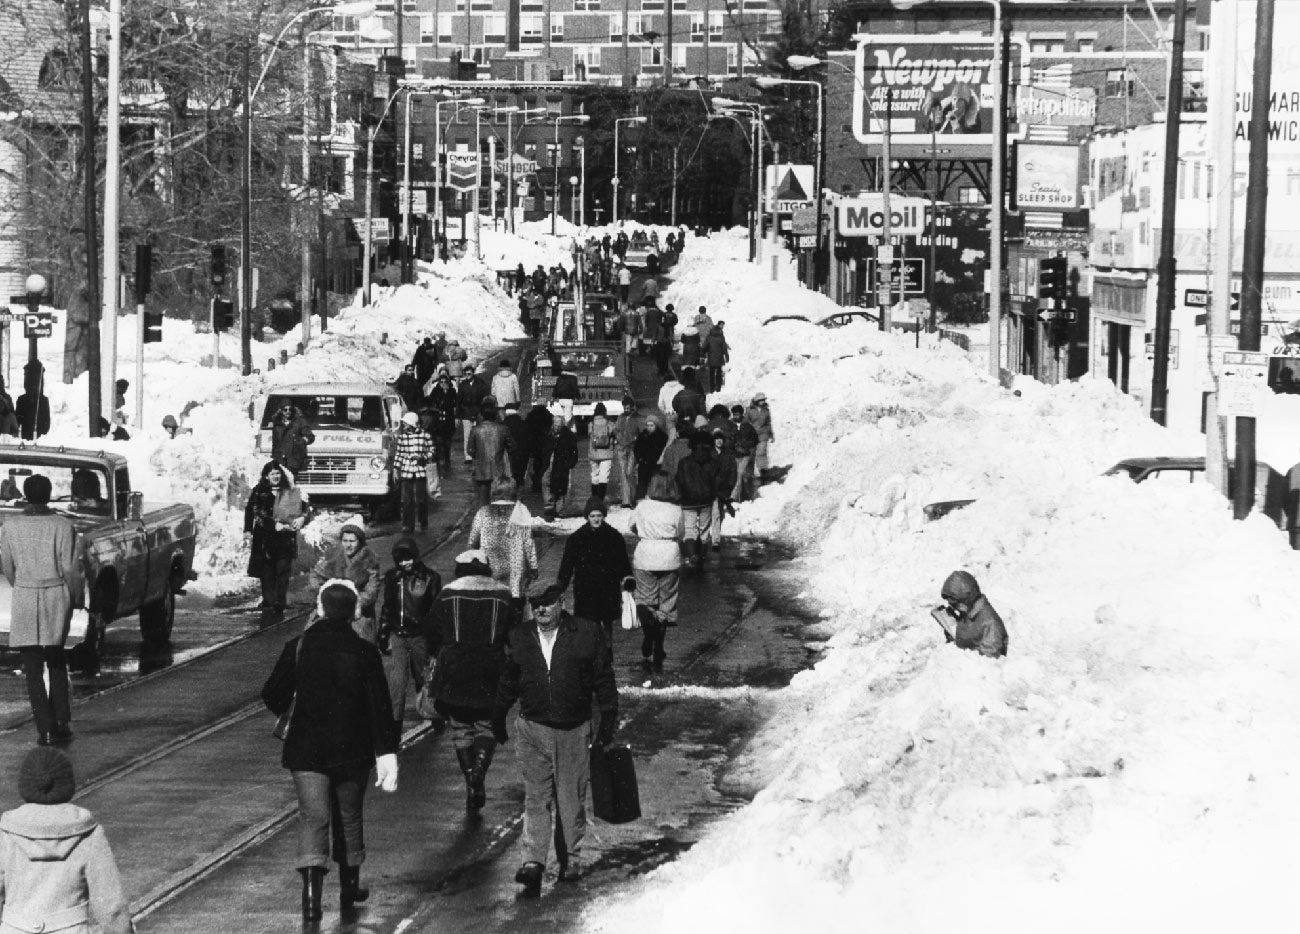   Jamaica Plain residents begin to venture out of their homes after a single lane of traffic is cleared of snow in February, 1978. This view is from Green Steet looking towards Boston. Photograph taken by and provided courtesy of Mark Hoffman.    